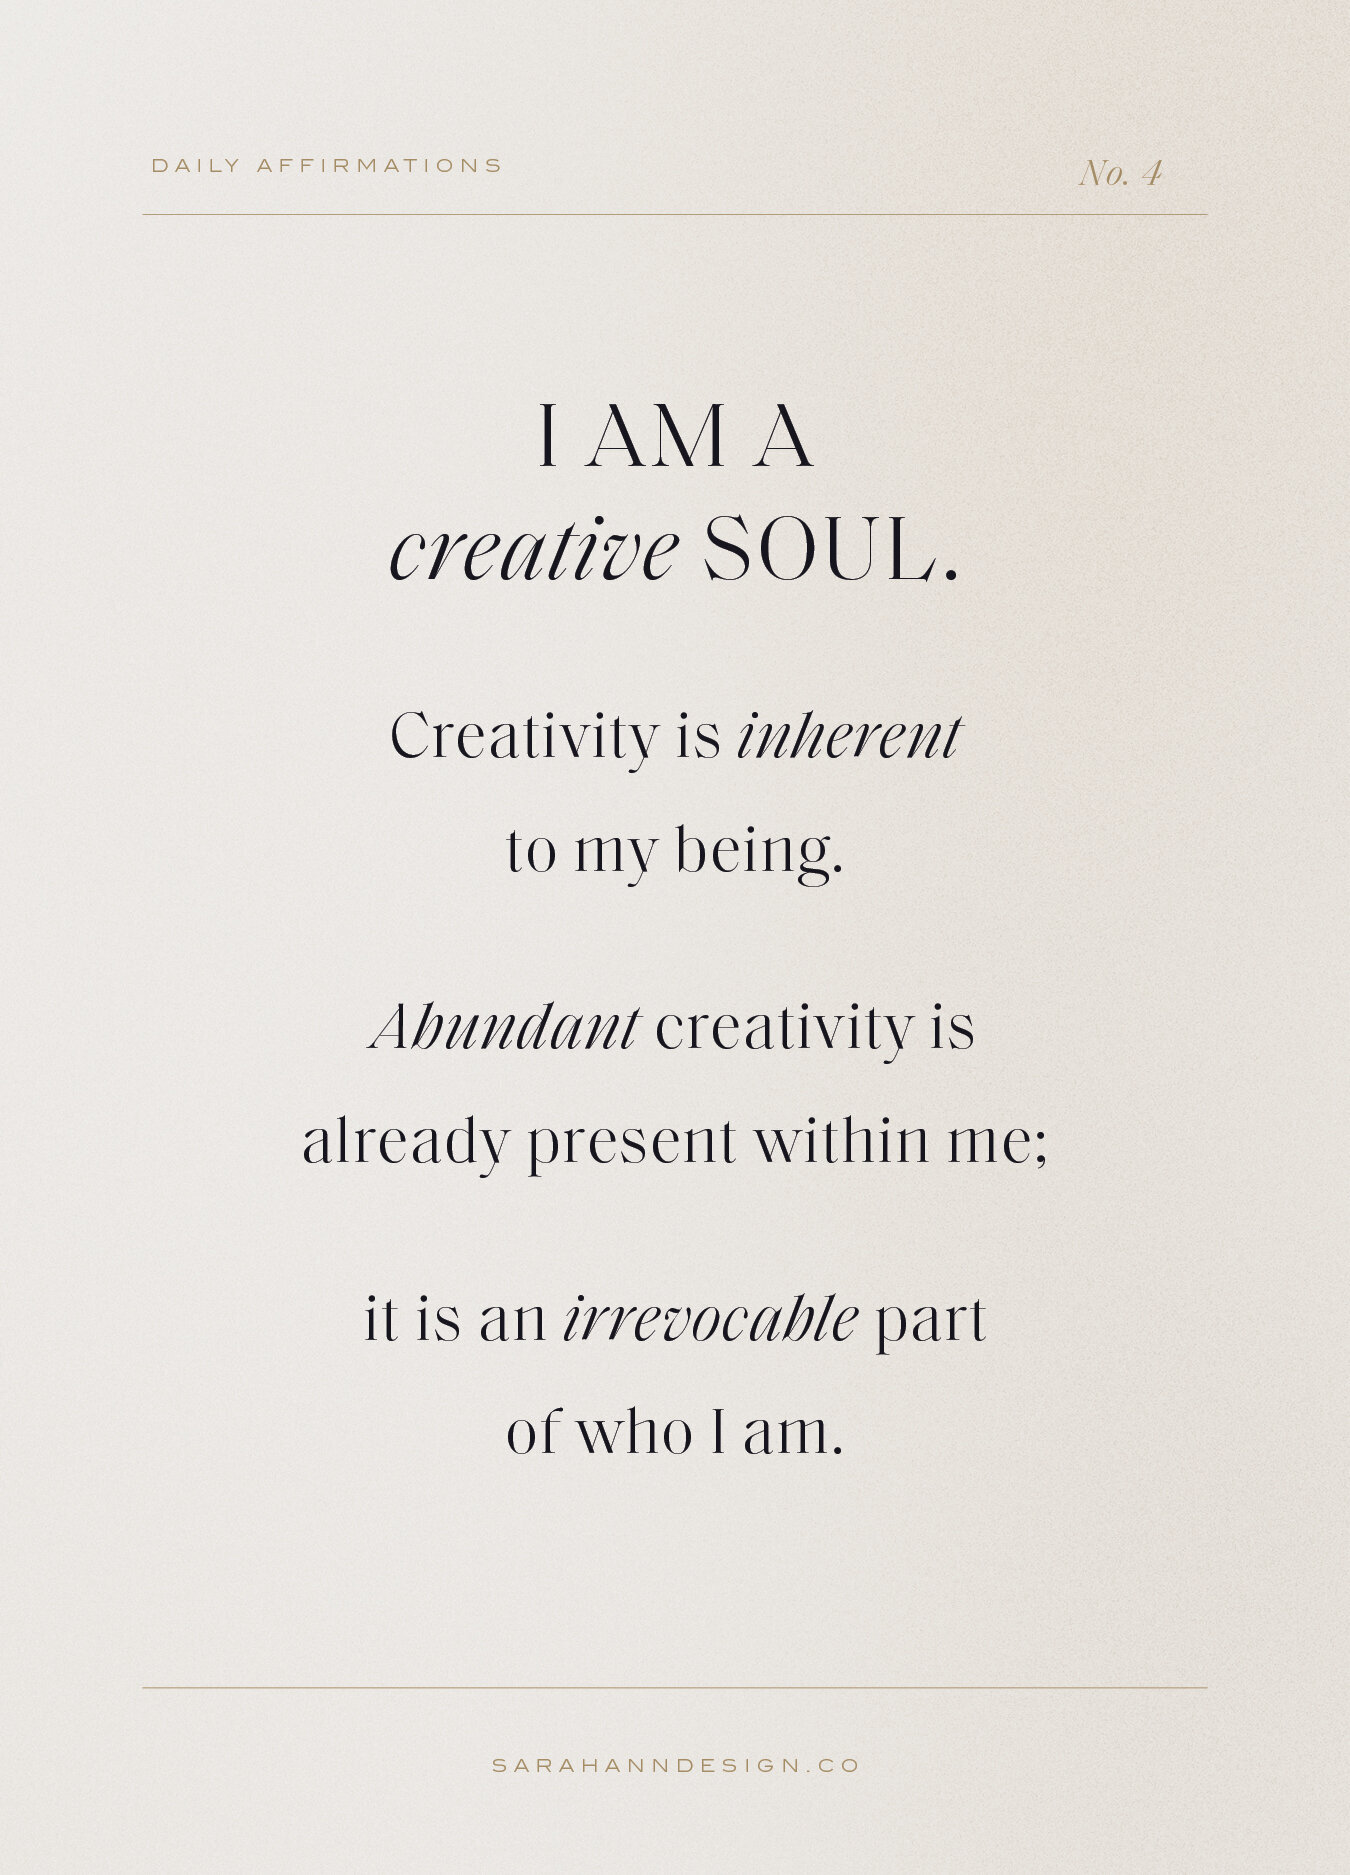 Daily Affirmations for the Creative Soul - Affirmations by Sarah Ann Design4